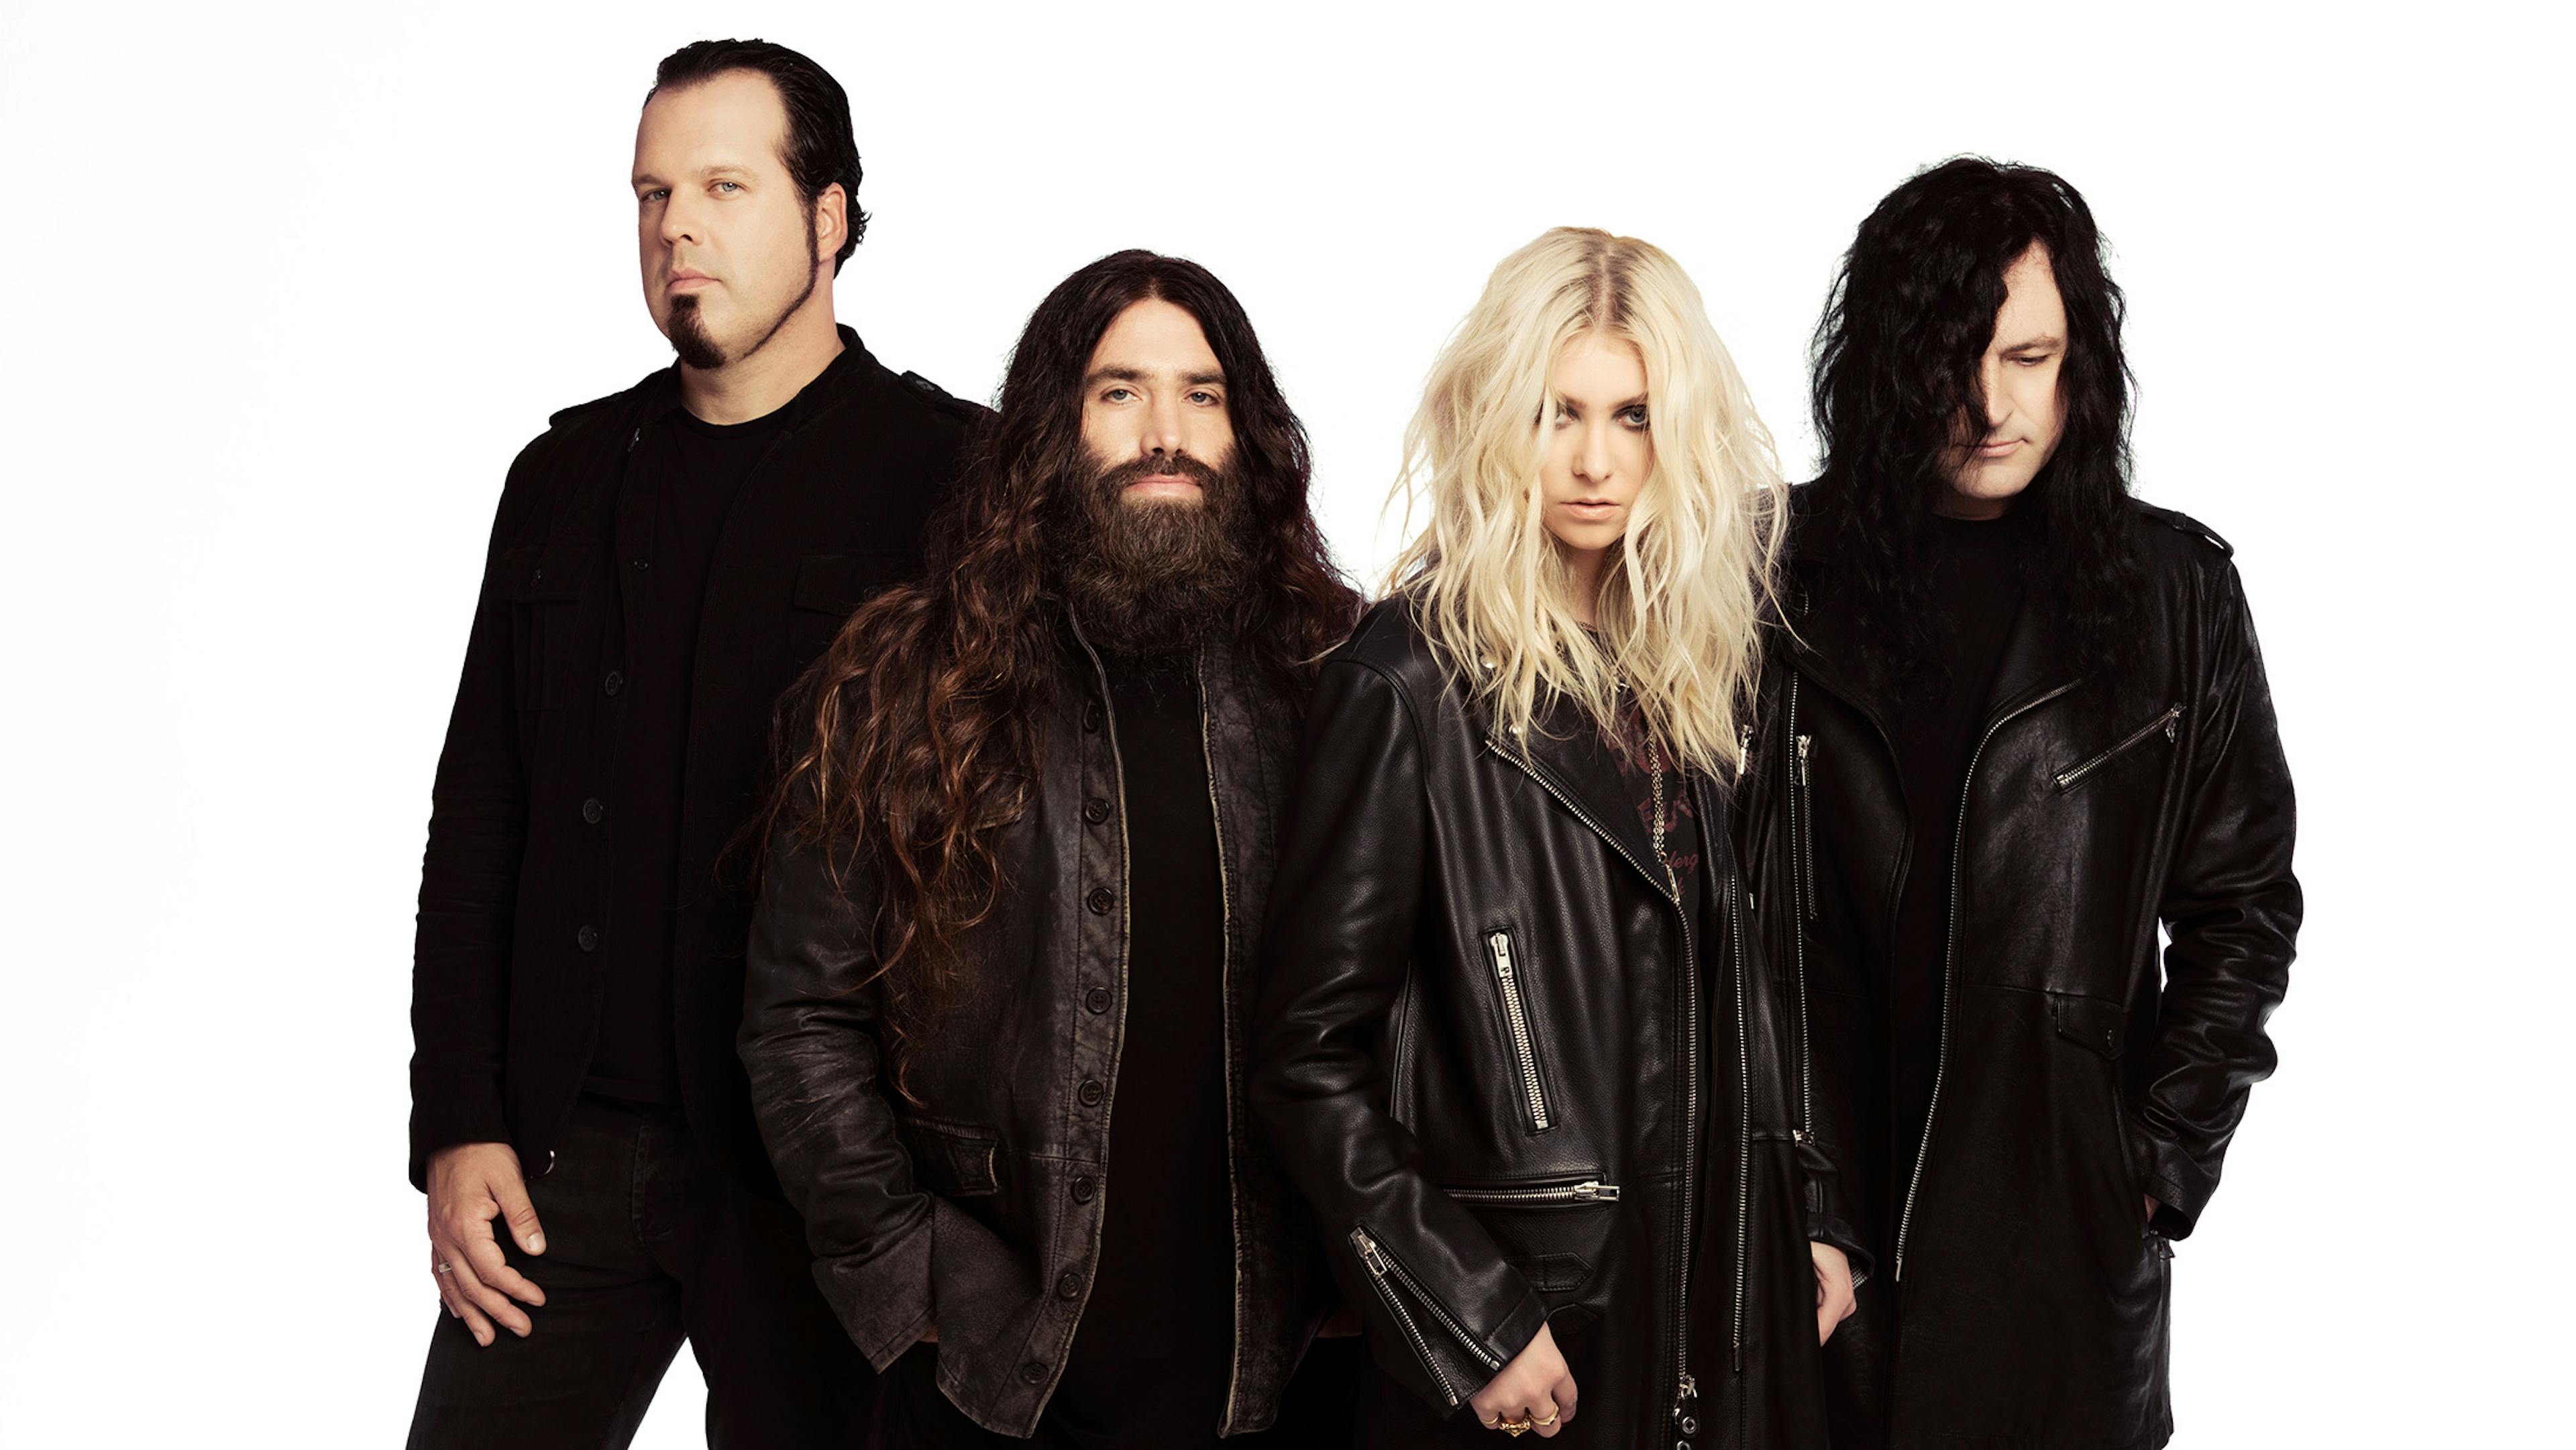 Taylor Momsen Says The Pretty Reckless' New Album Will Be Released In 2021